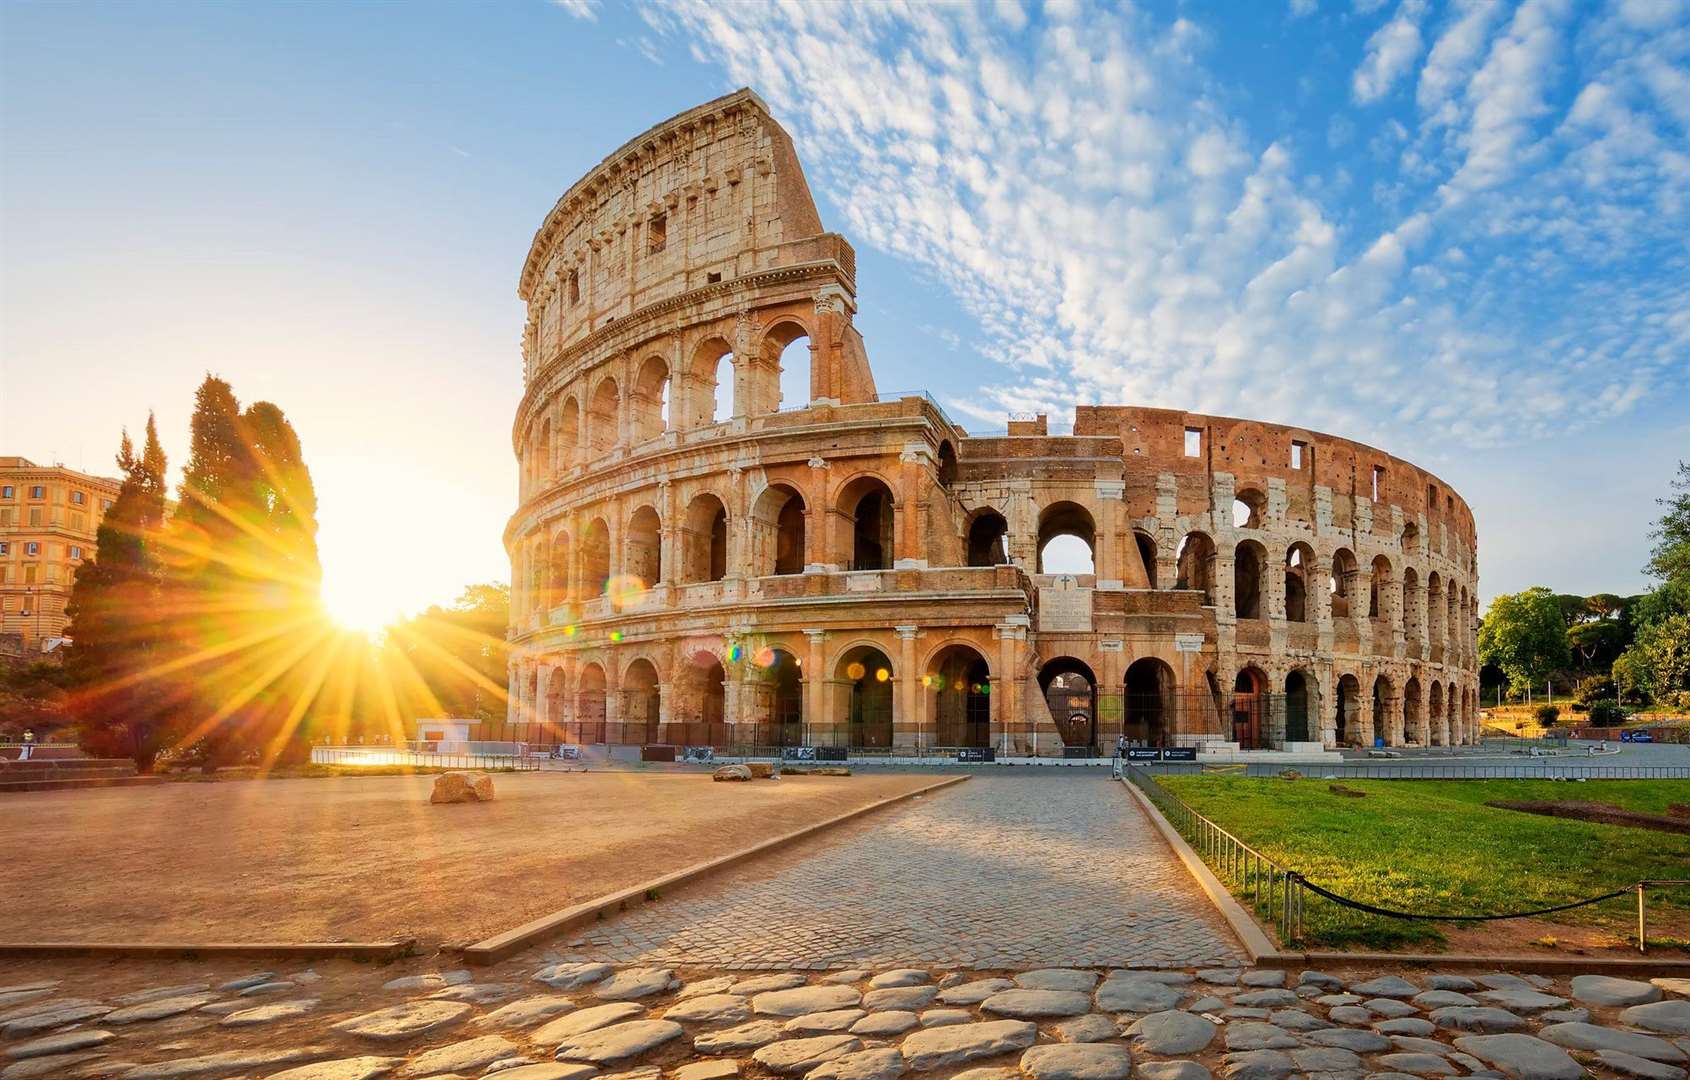 As temperatures break all records in Italy, access to some tourist attractions may be restricted. Image: iStock.